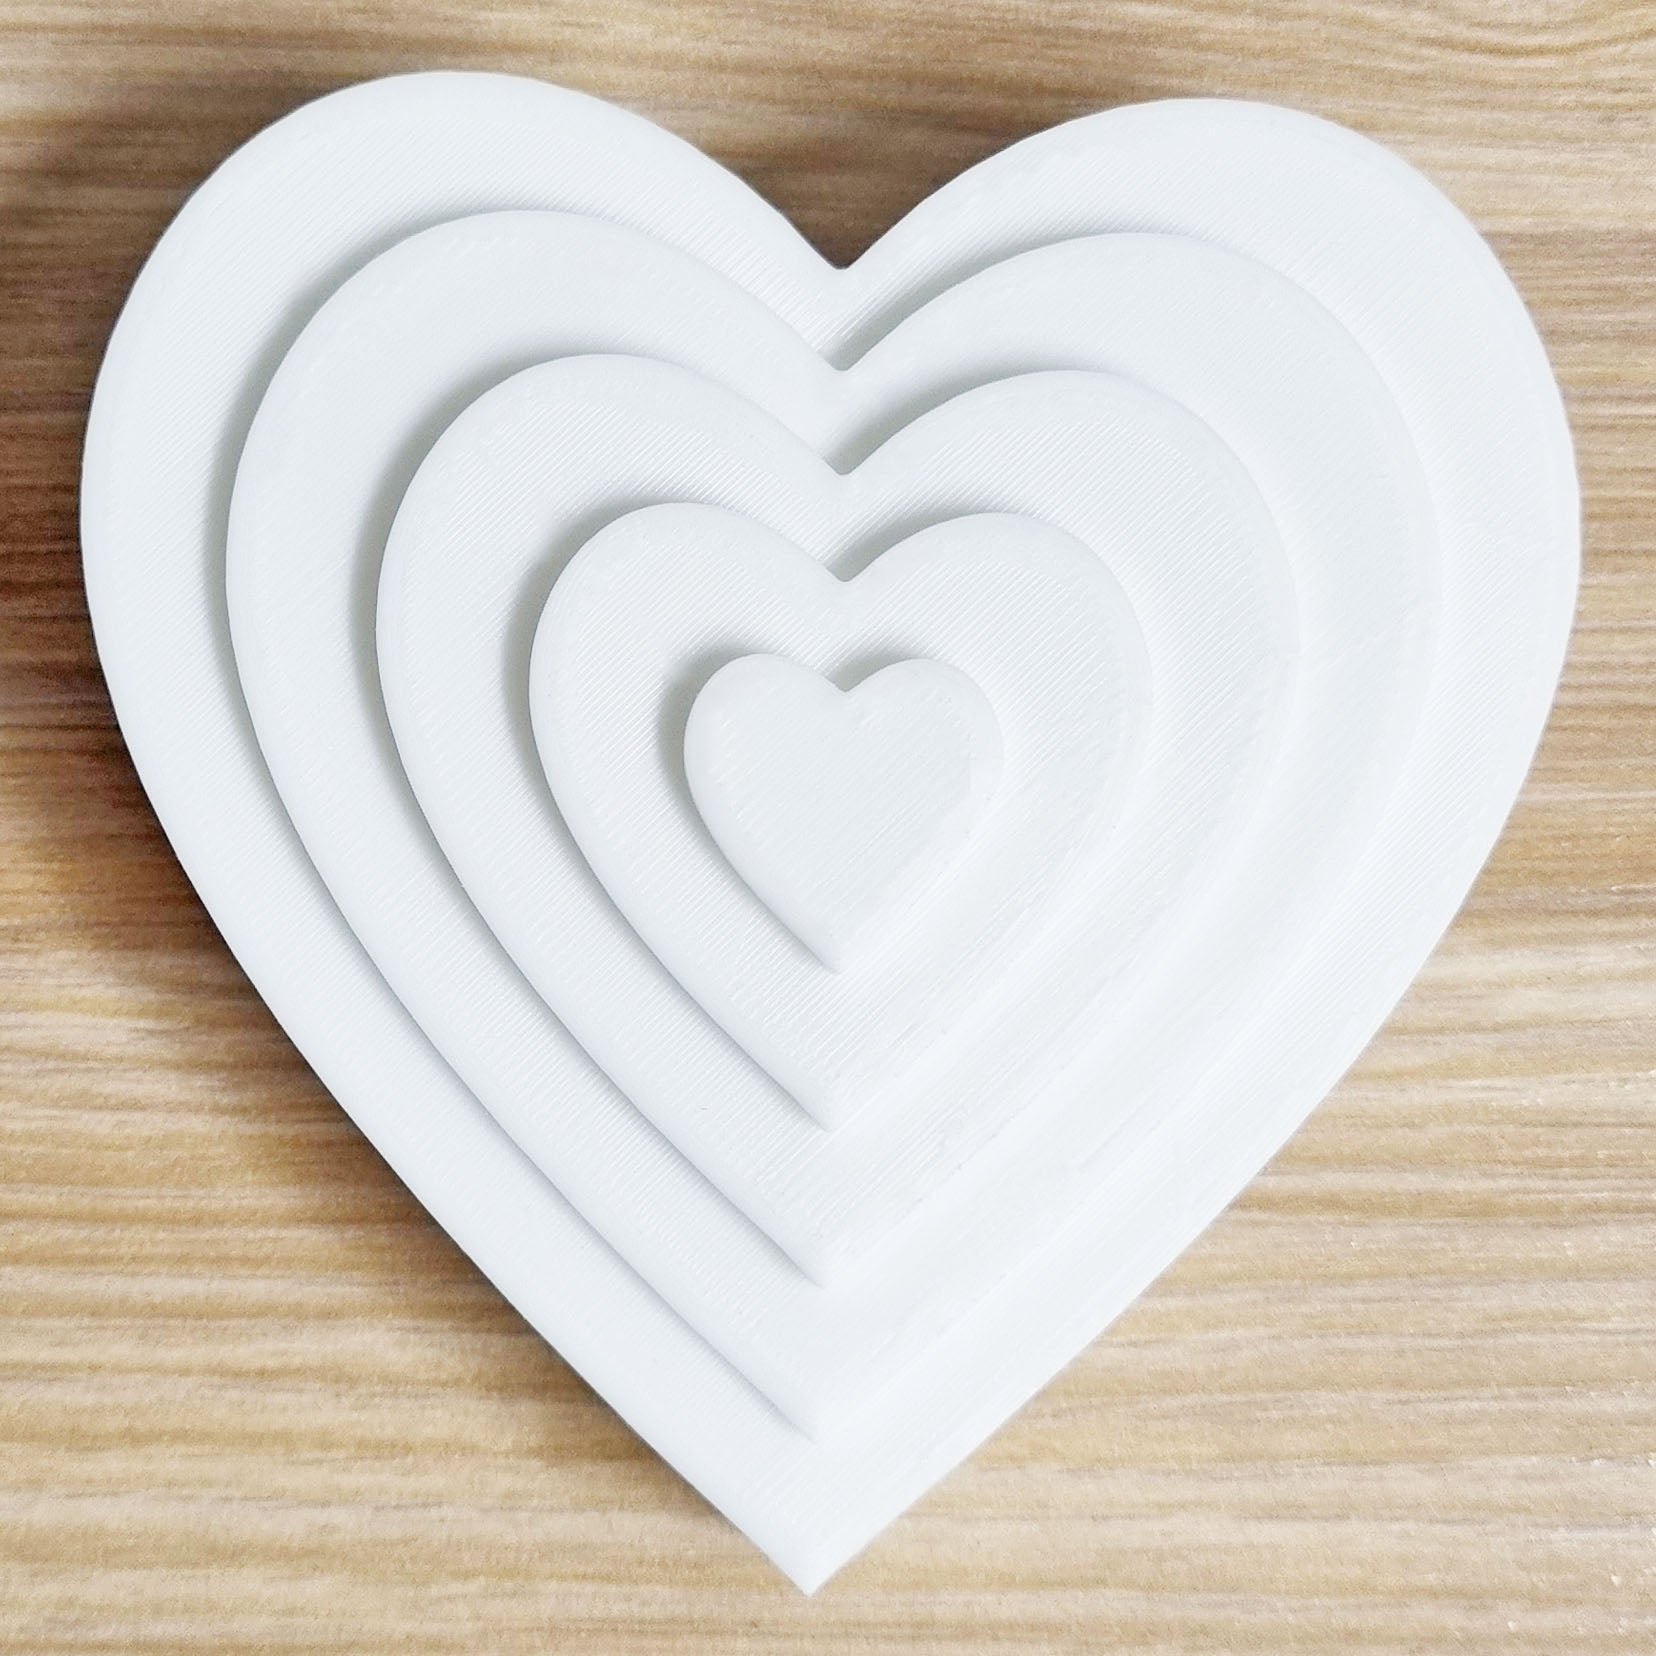 Layered Heart Mould | Truly Personal | Bath Bomb, Soap, Resin, Chocolate, Jelly, Wax Melts Mold